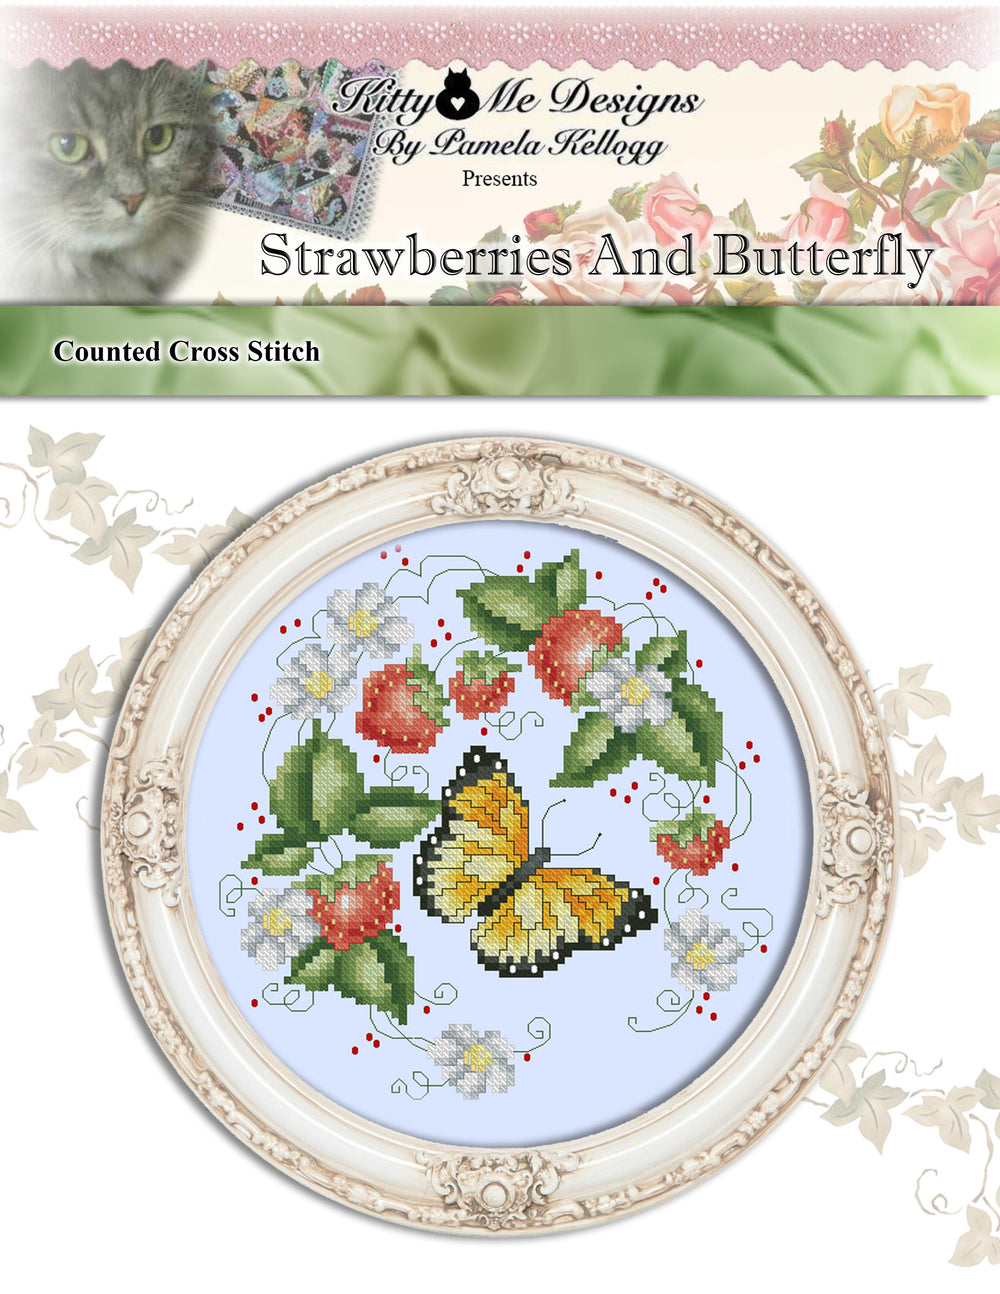 Strawberries and Butterfly by Kitty and Me Designs